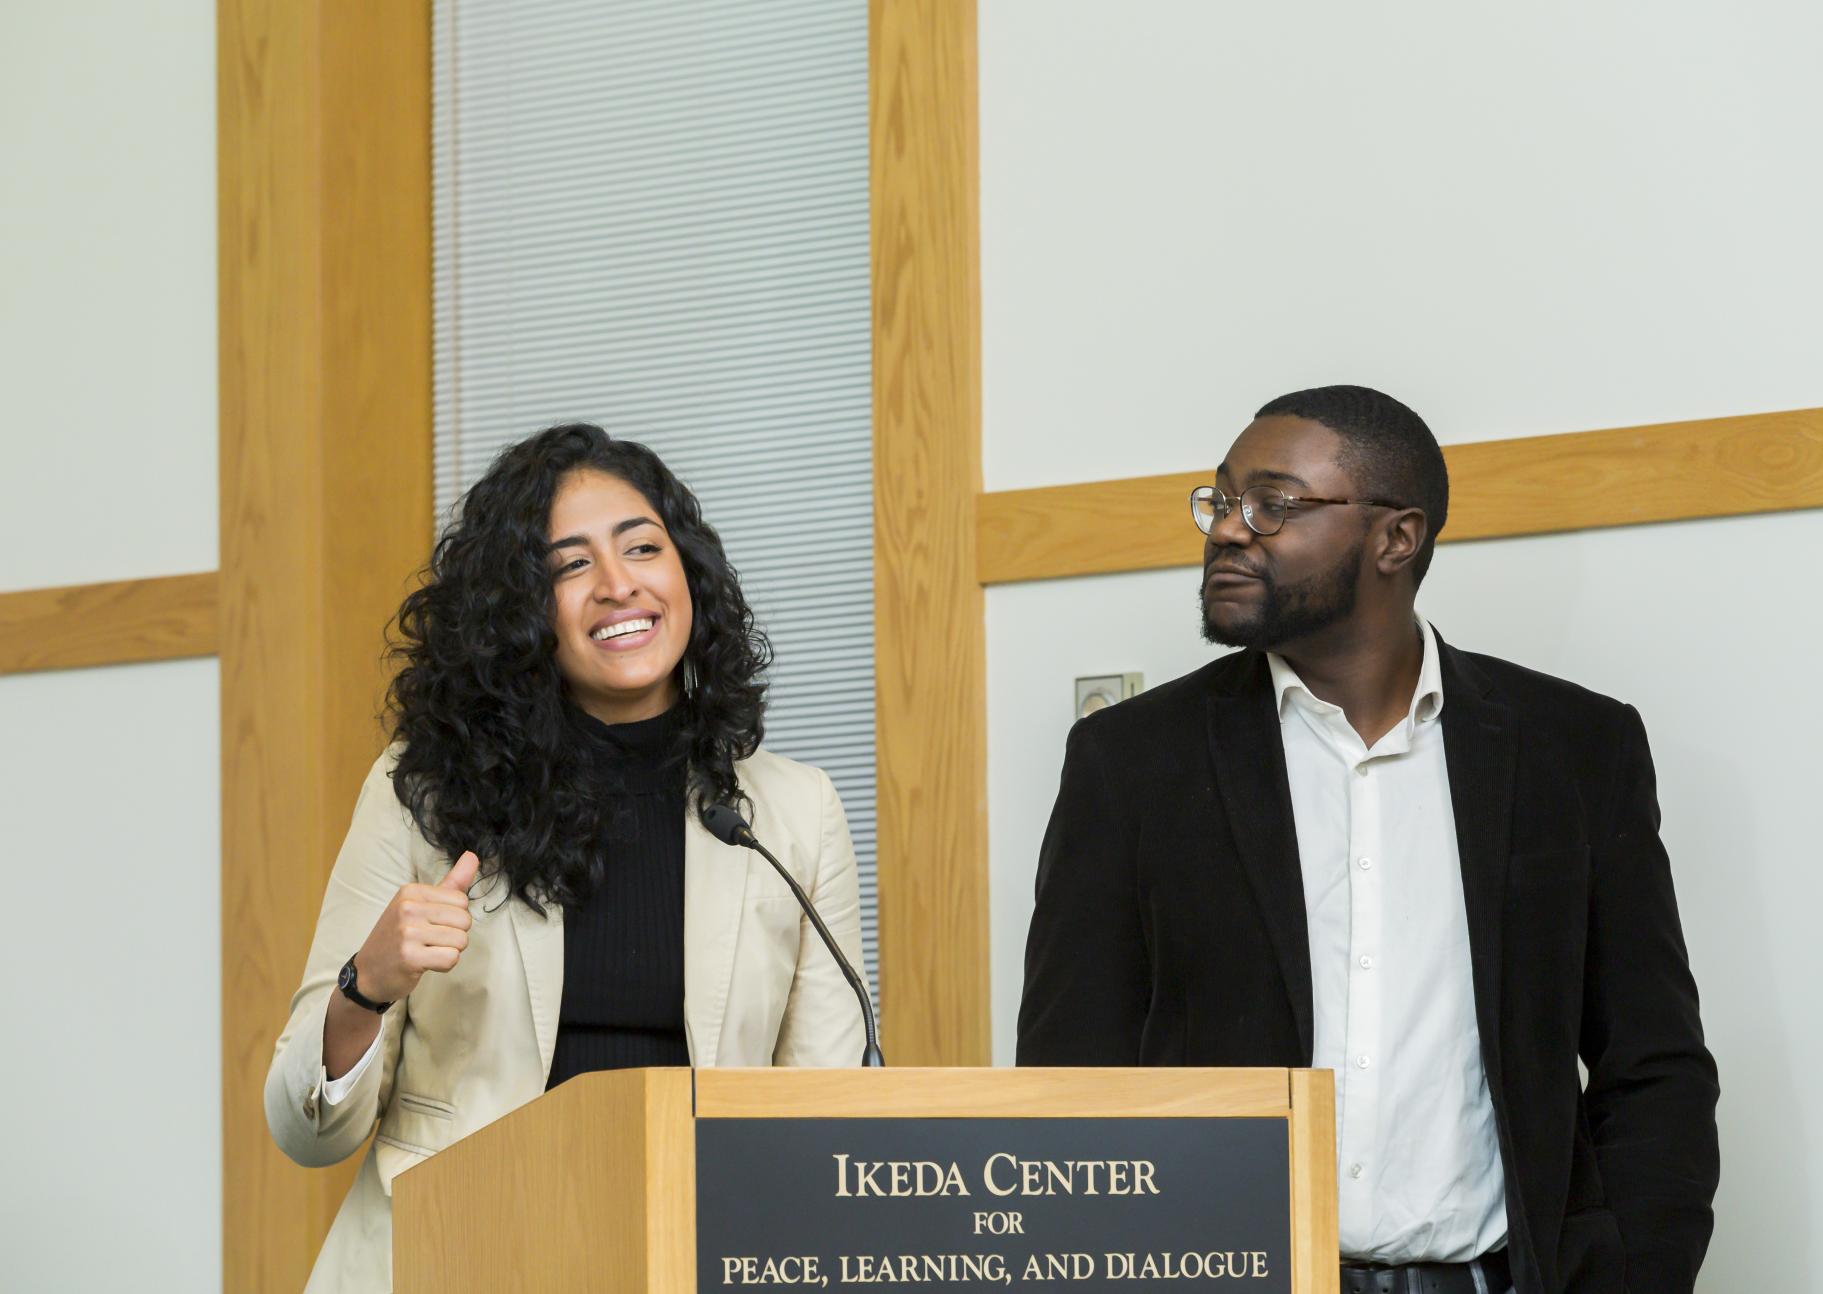 Ana Pediet and Isaiah Moon present at the 2019 Ikeda Forum